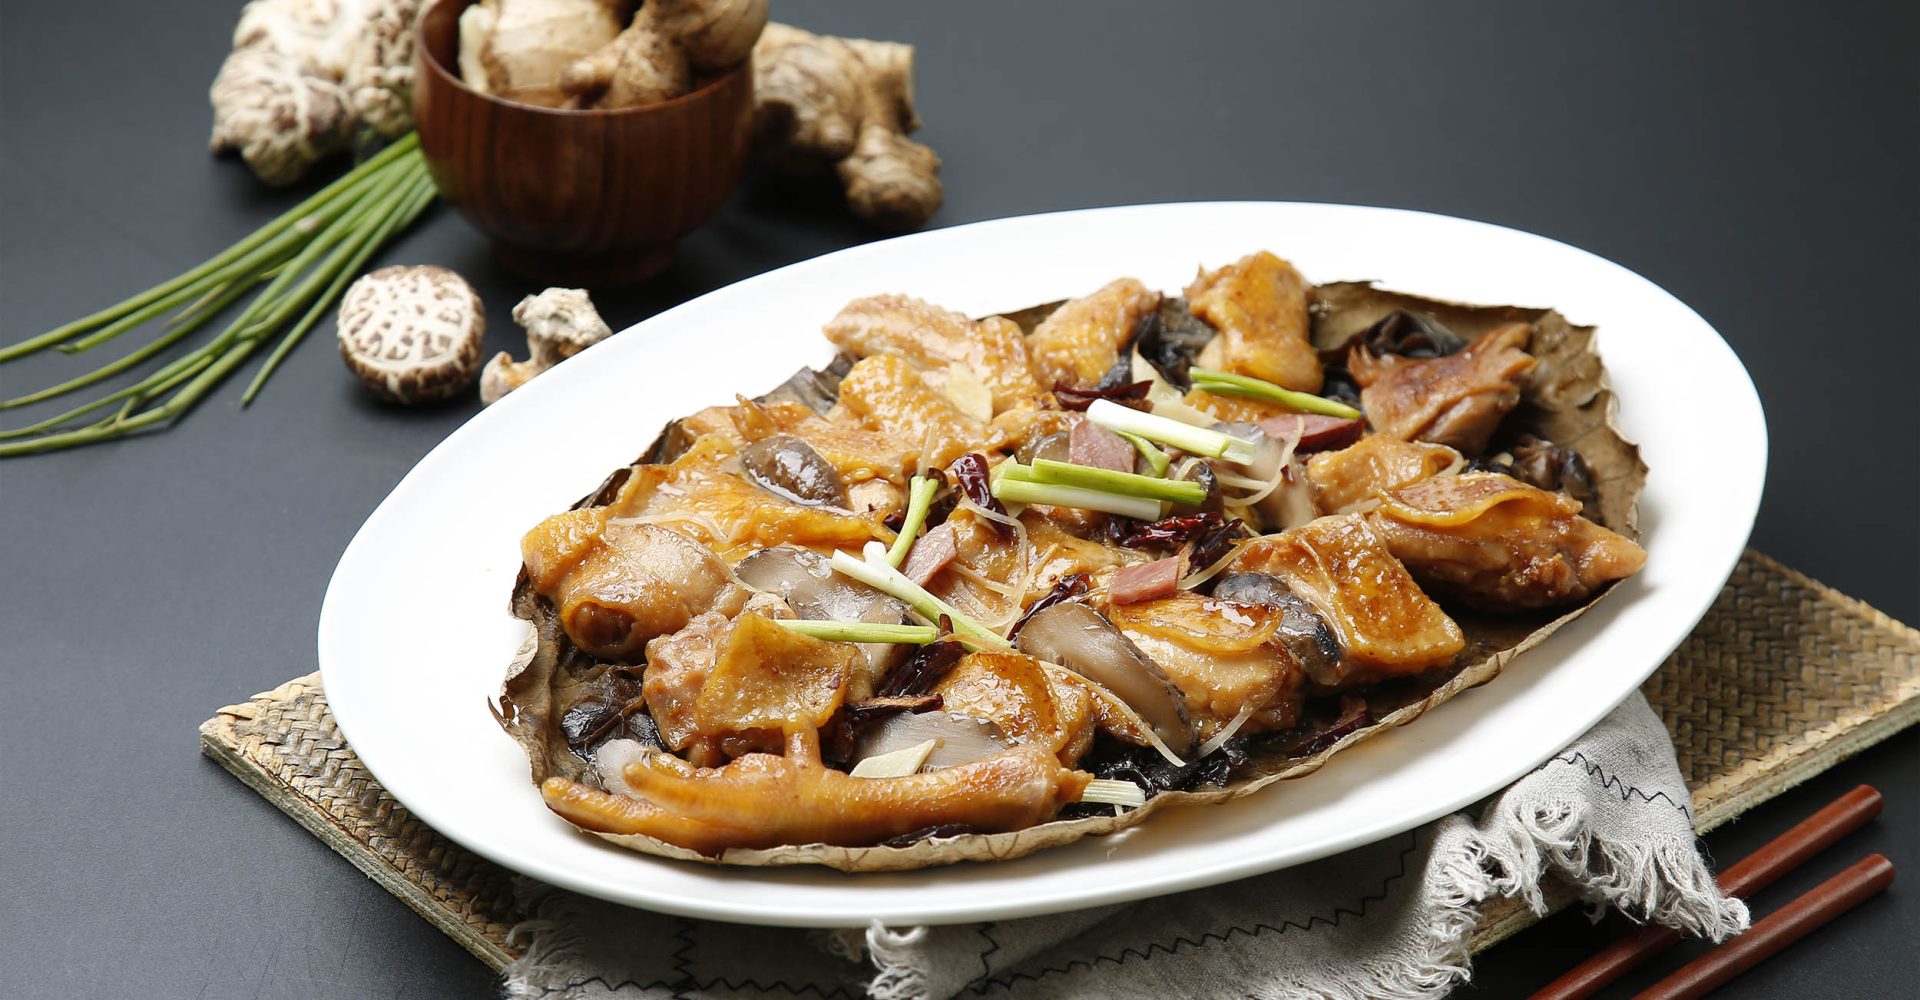 Xiu Poultry - Steamed chicken in lotus leaf